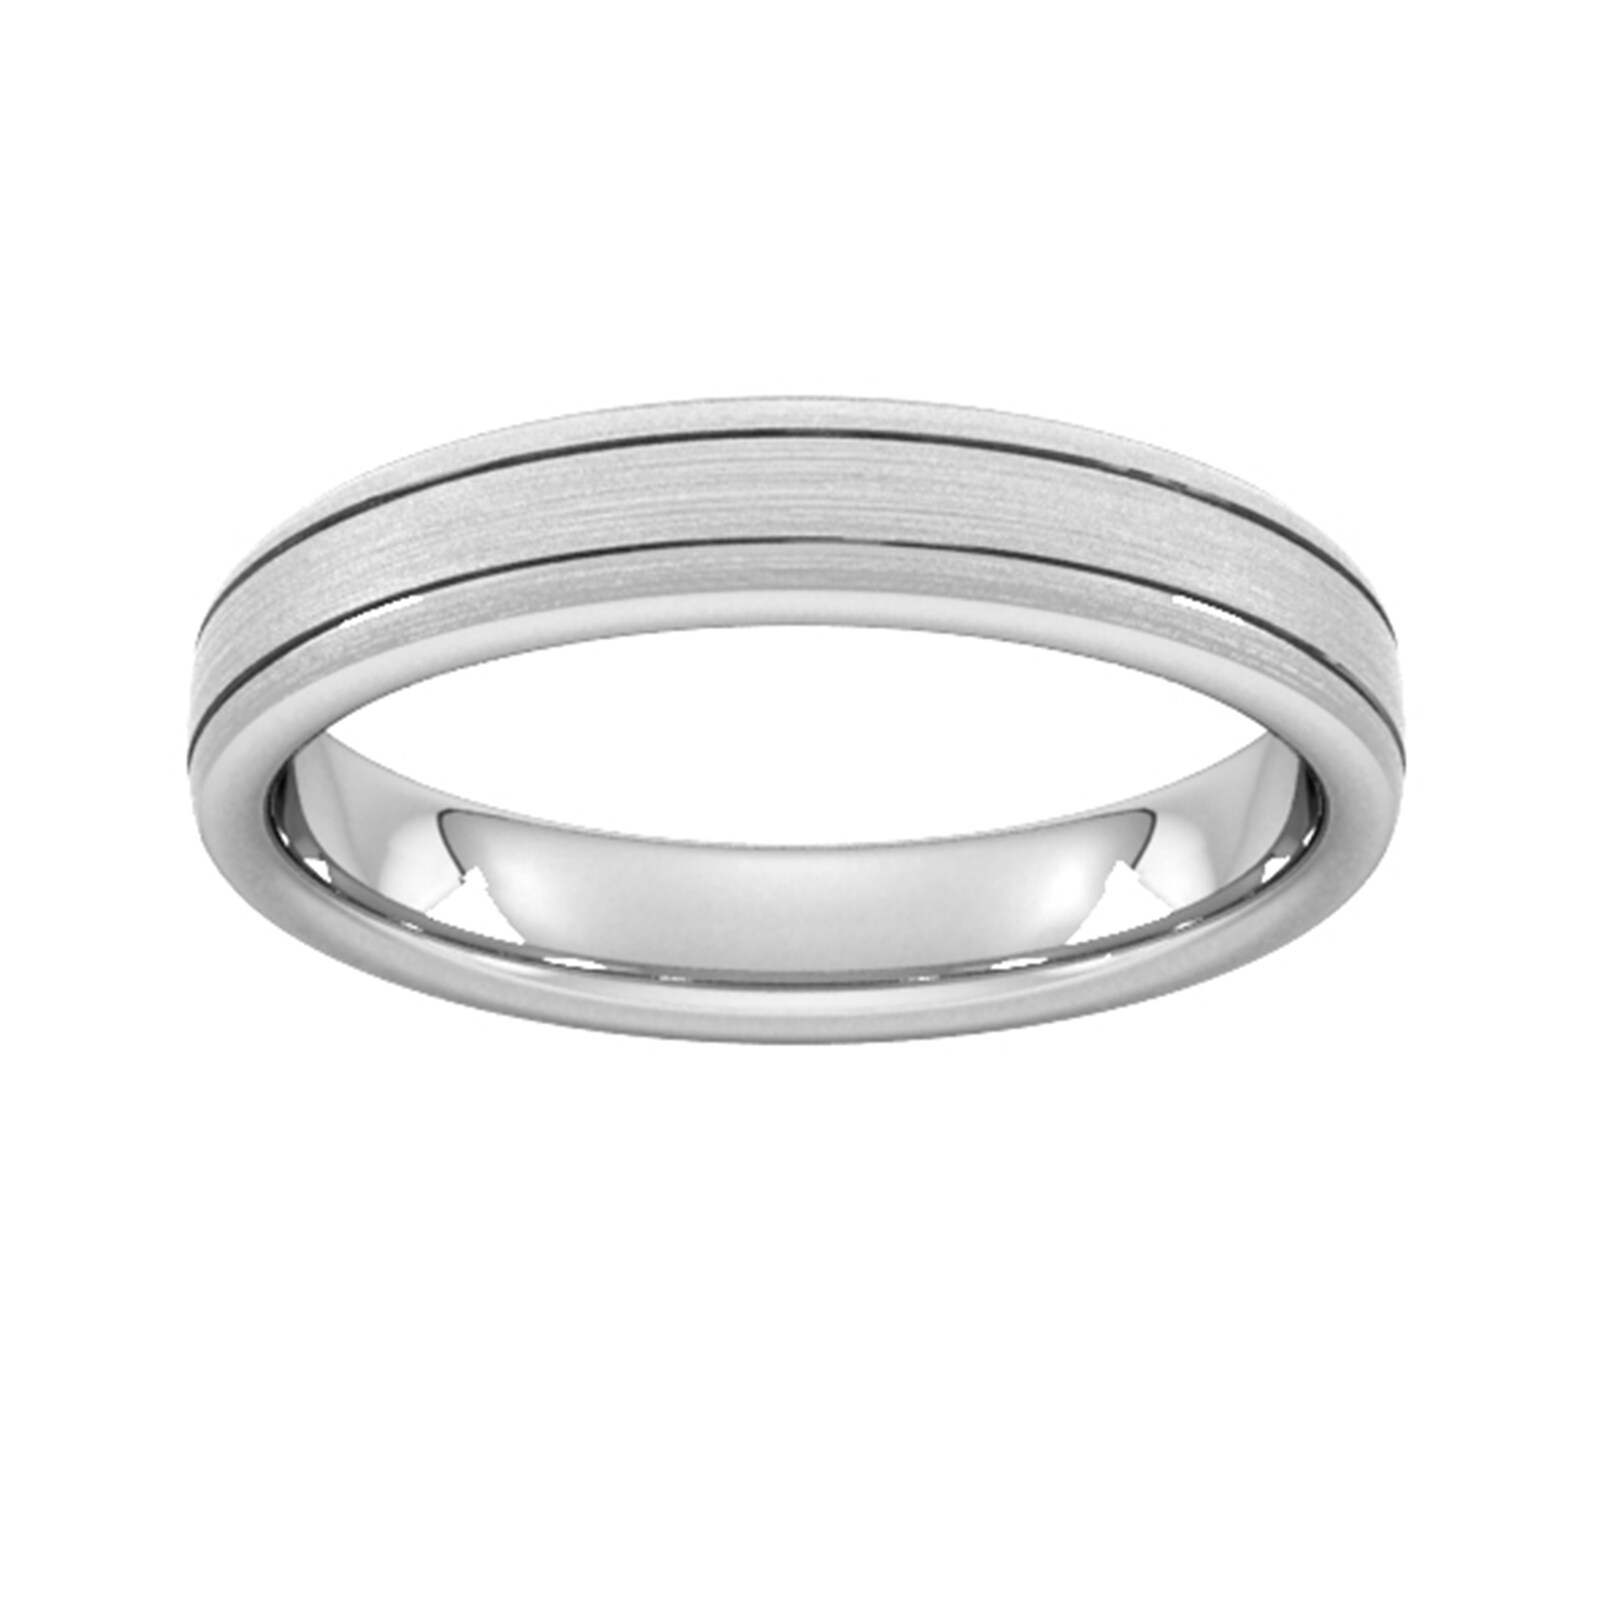 4mm D Shape Standard Matt Finish With Double Grooves Wedding Ring In 18 Carat White Gold - Ring Size O